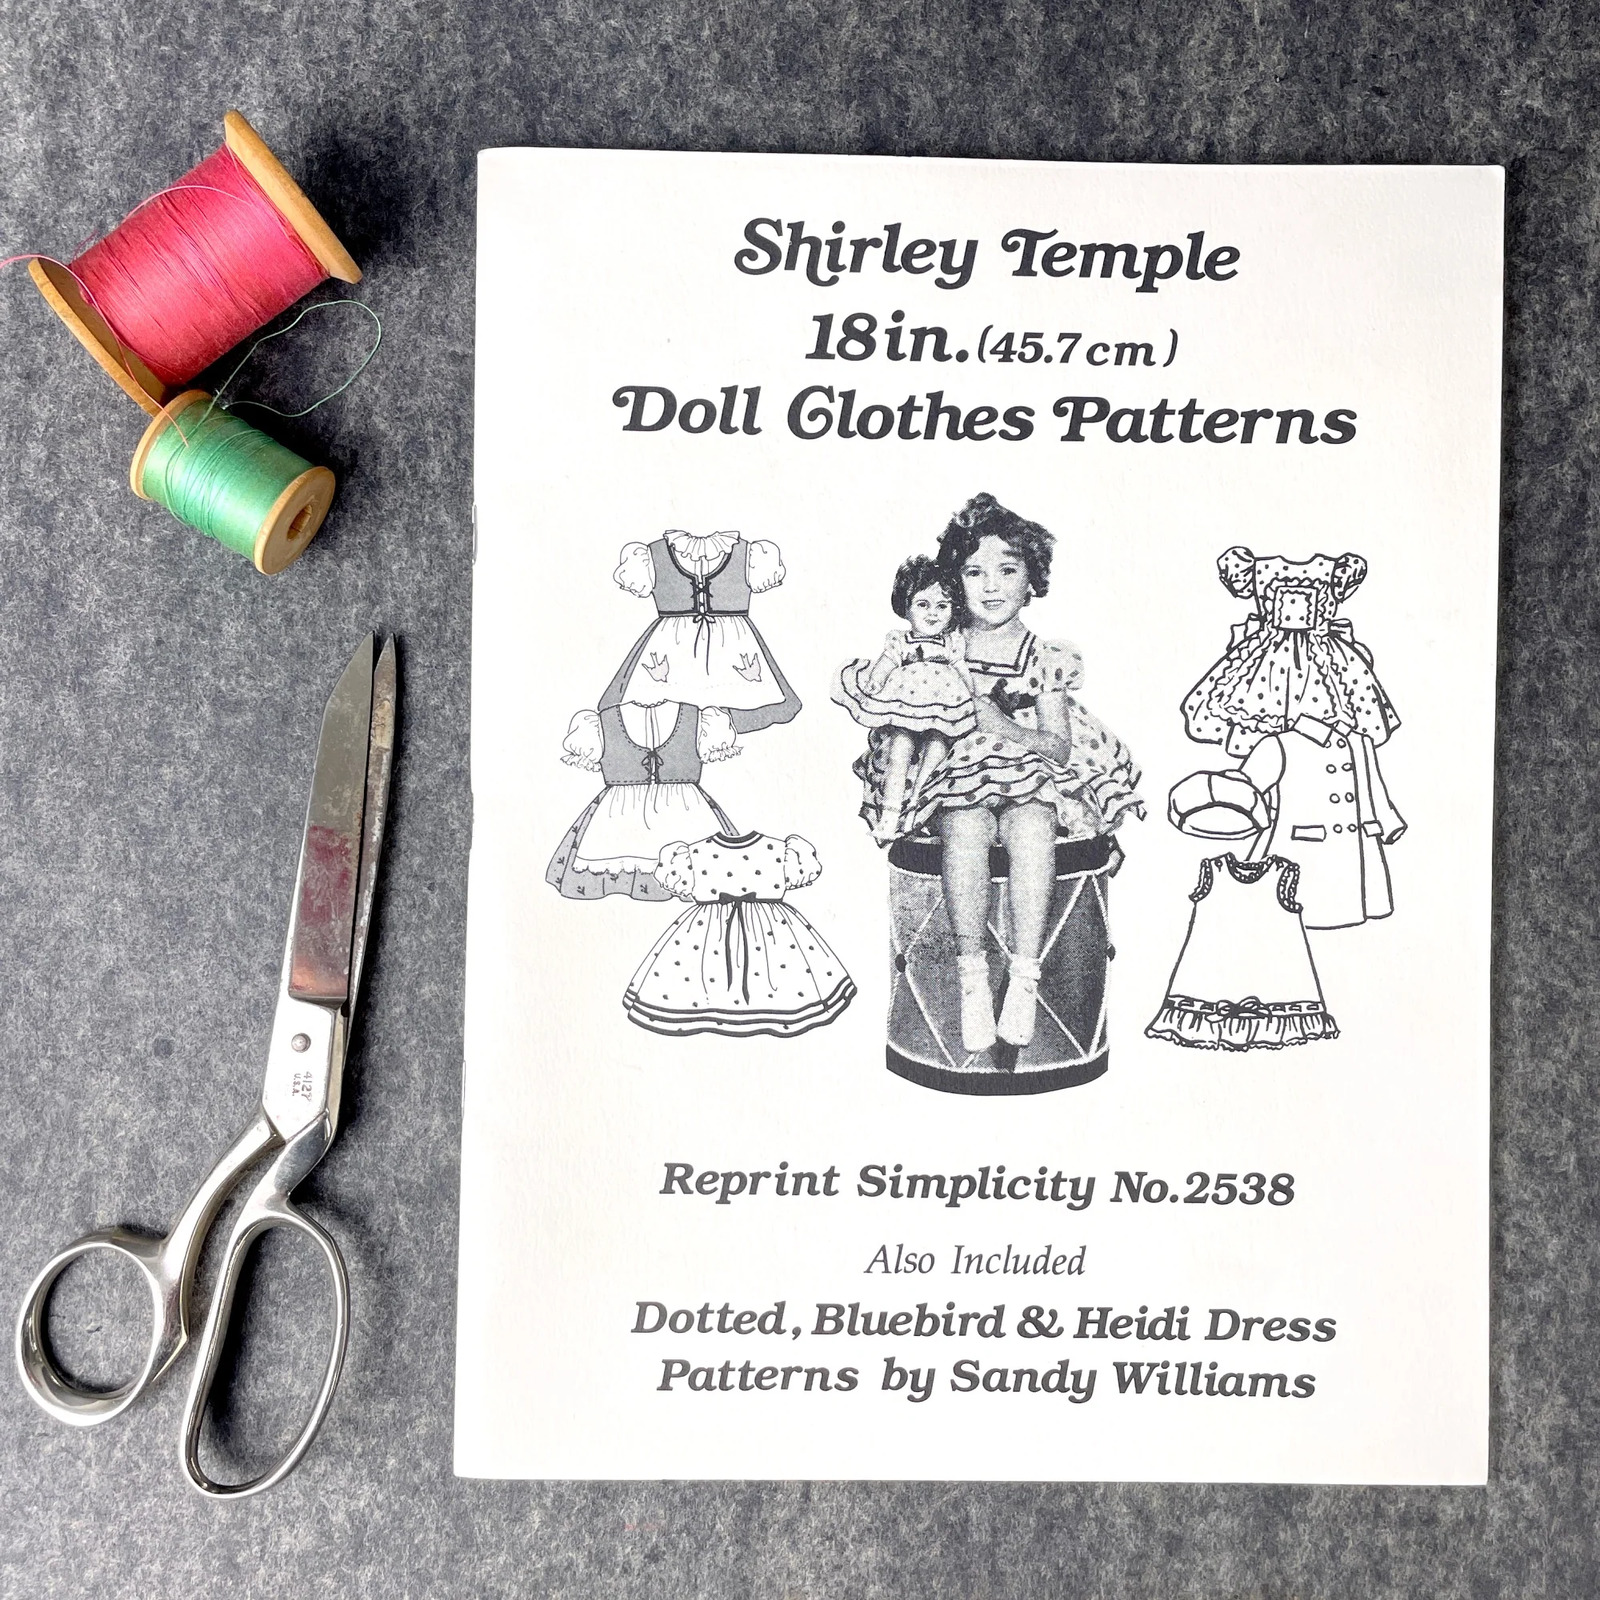 Shirley Temple 18 in. Doll Clothes Patterns - 1981 paperback